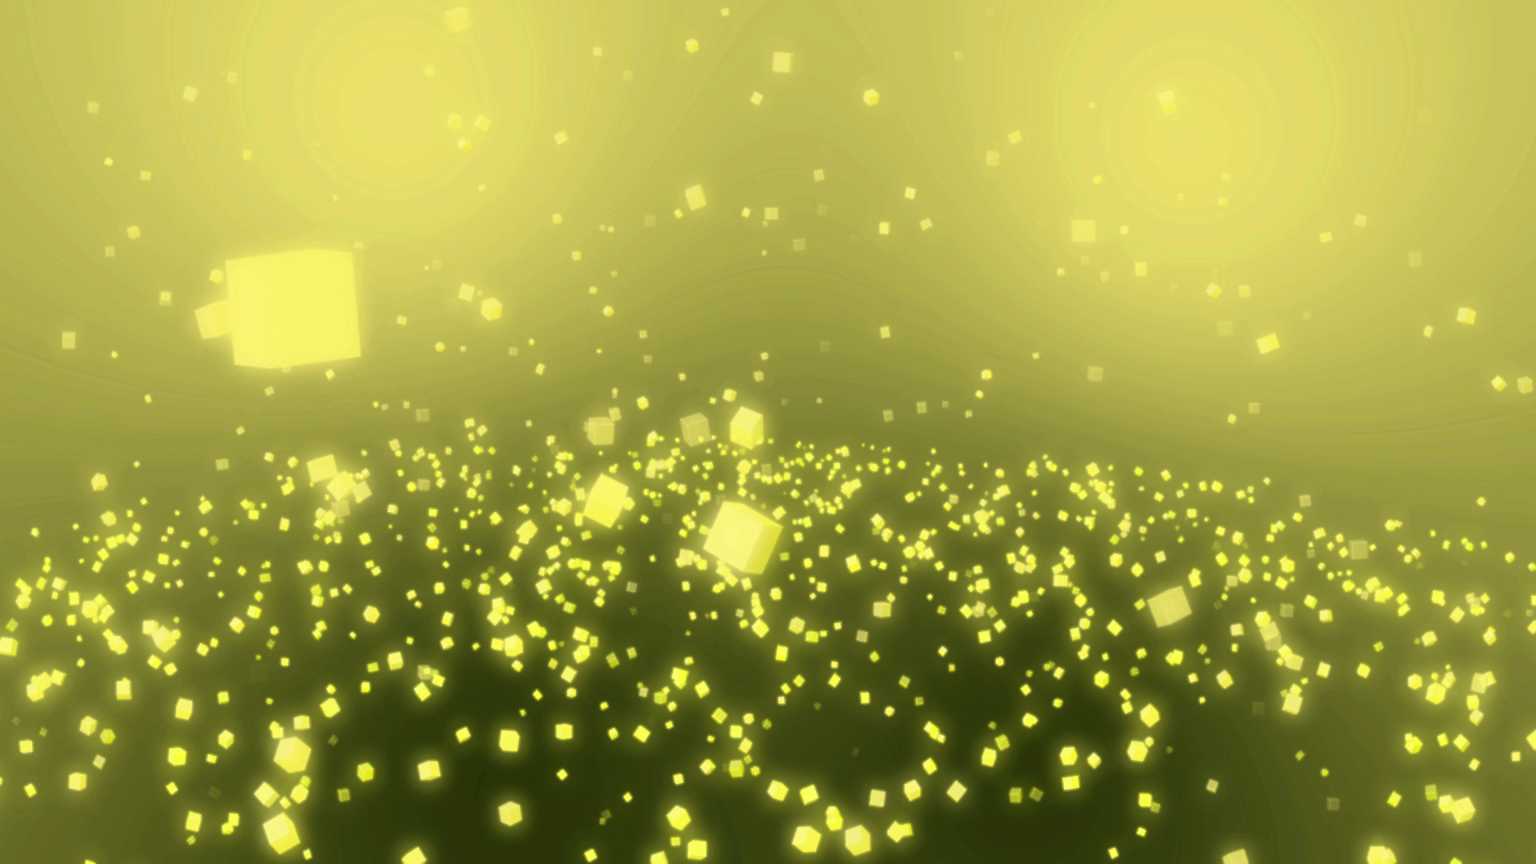 4K Falling Yellow Cubes Screensaver || VFX Free To Use 4K Motion Background